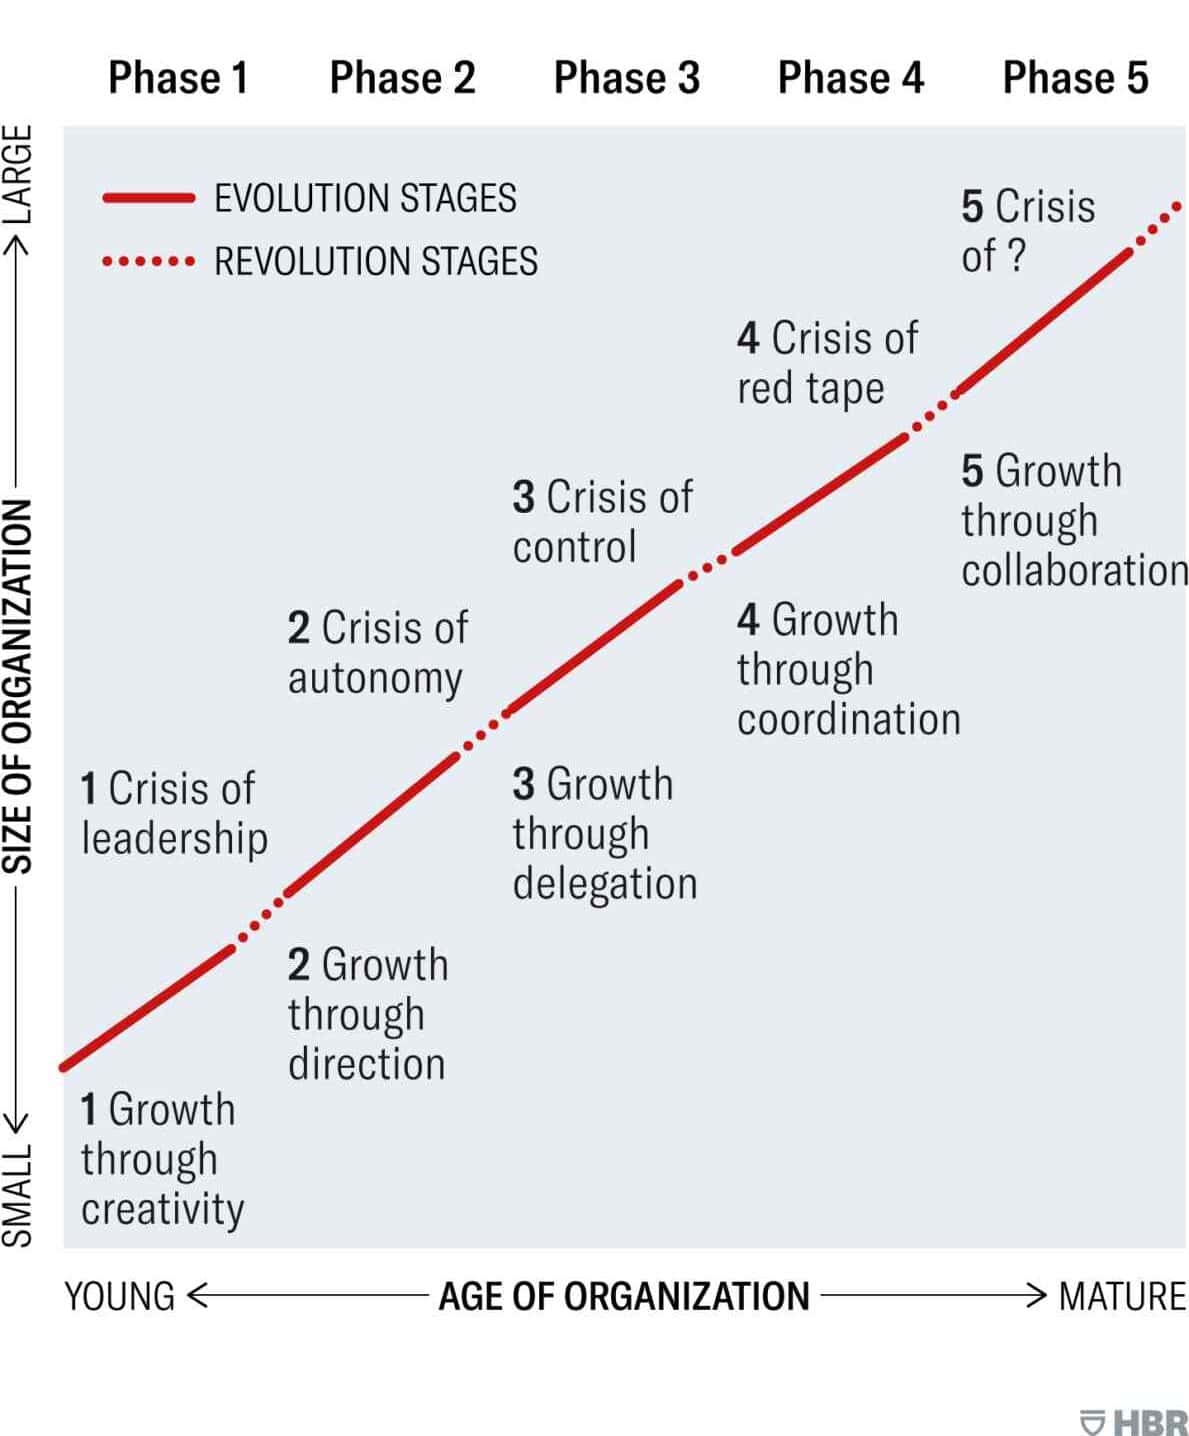 SMALL BUSINESS GROWTH PHASES by HBR